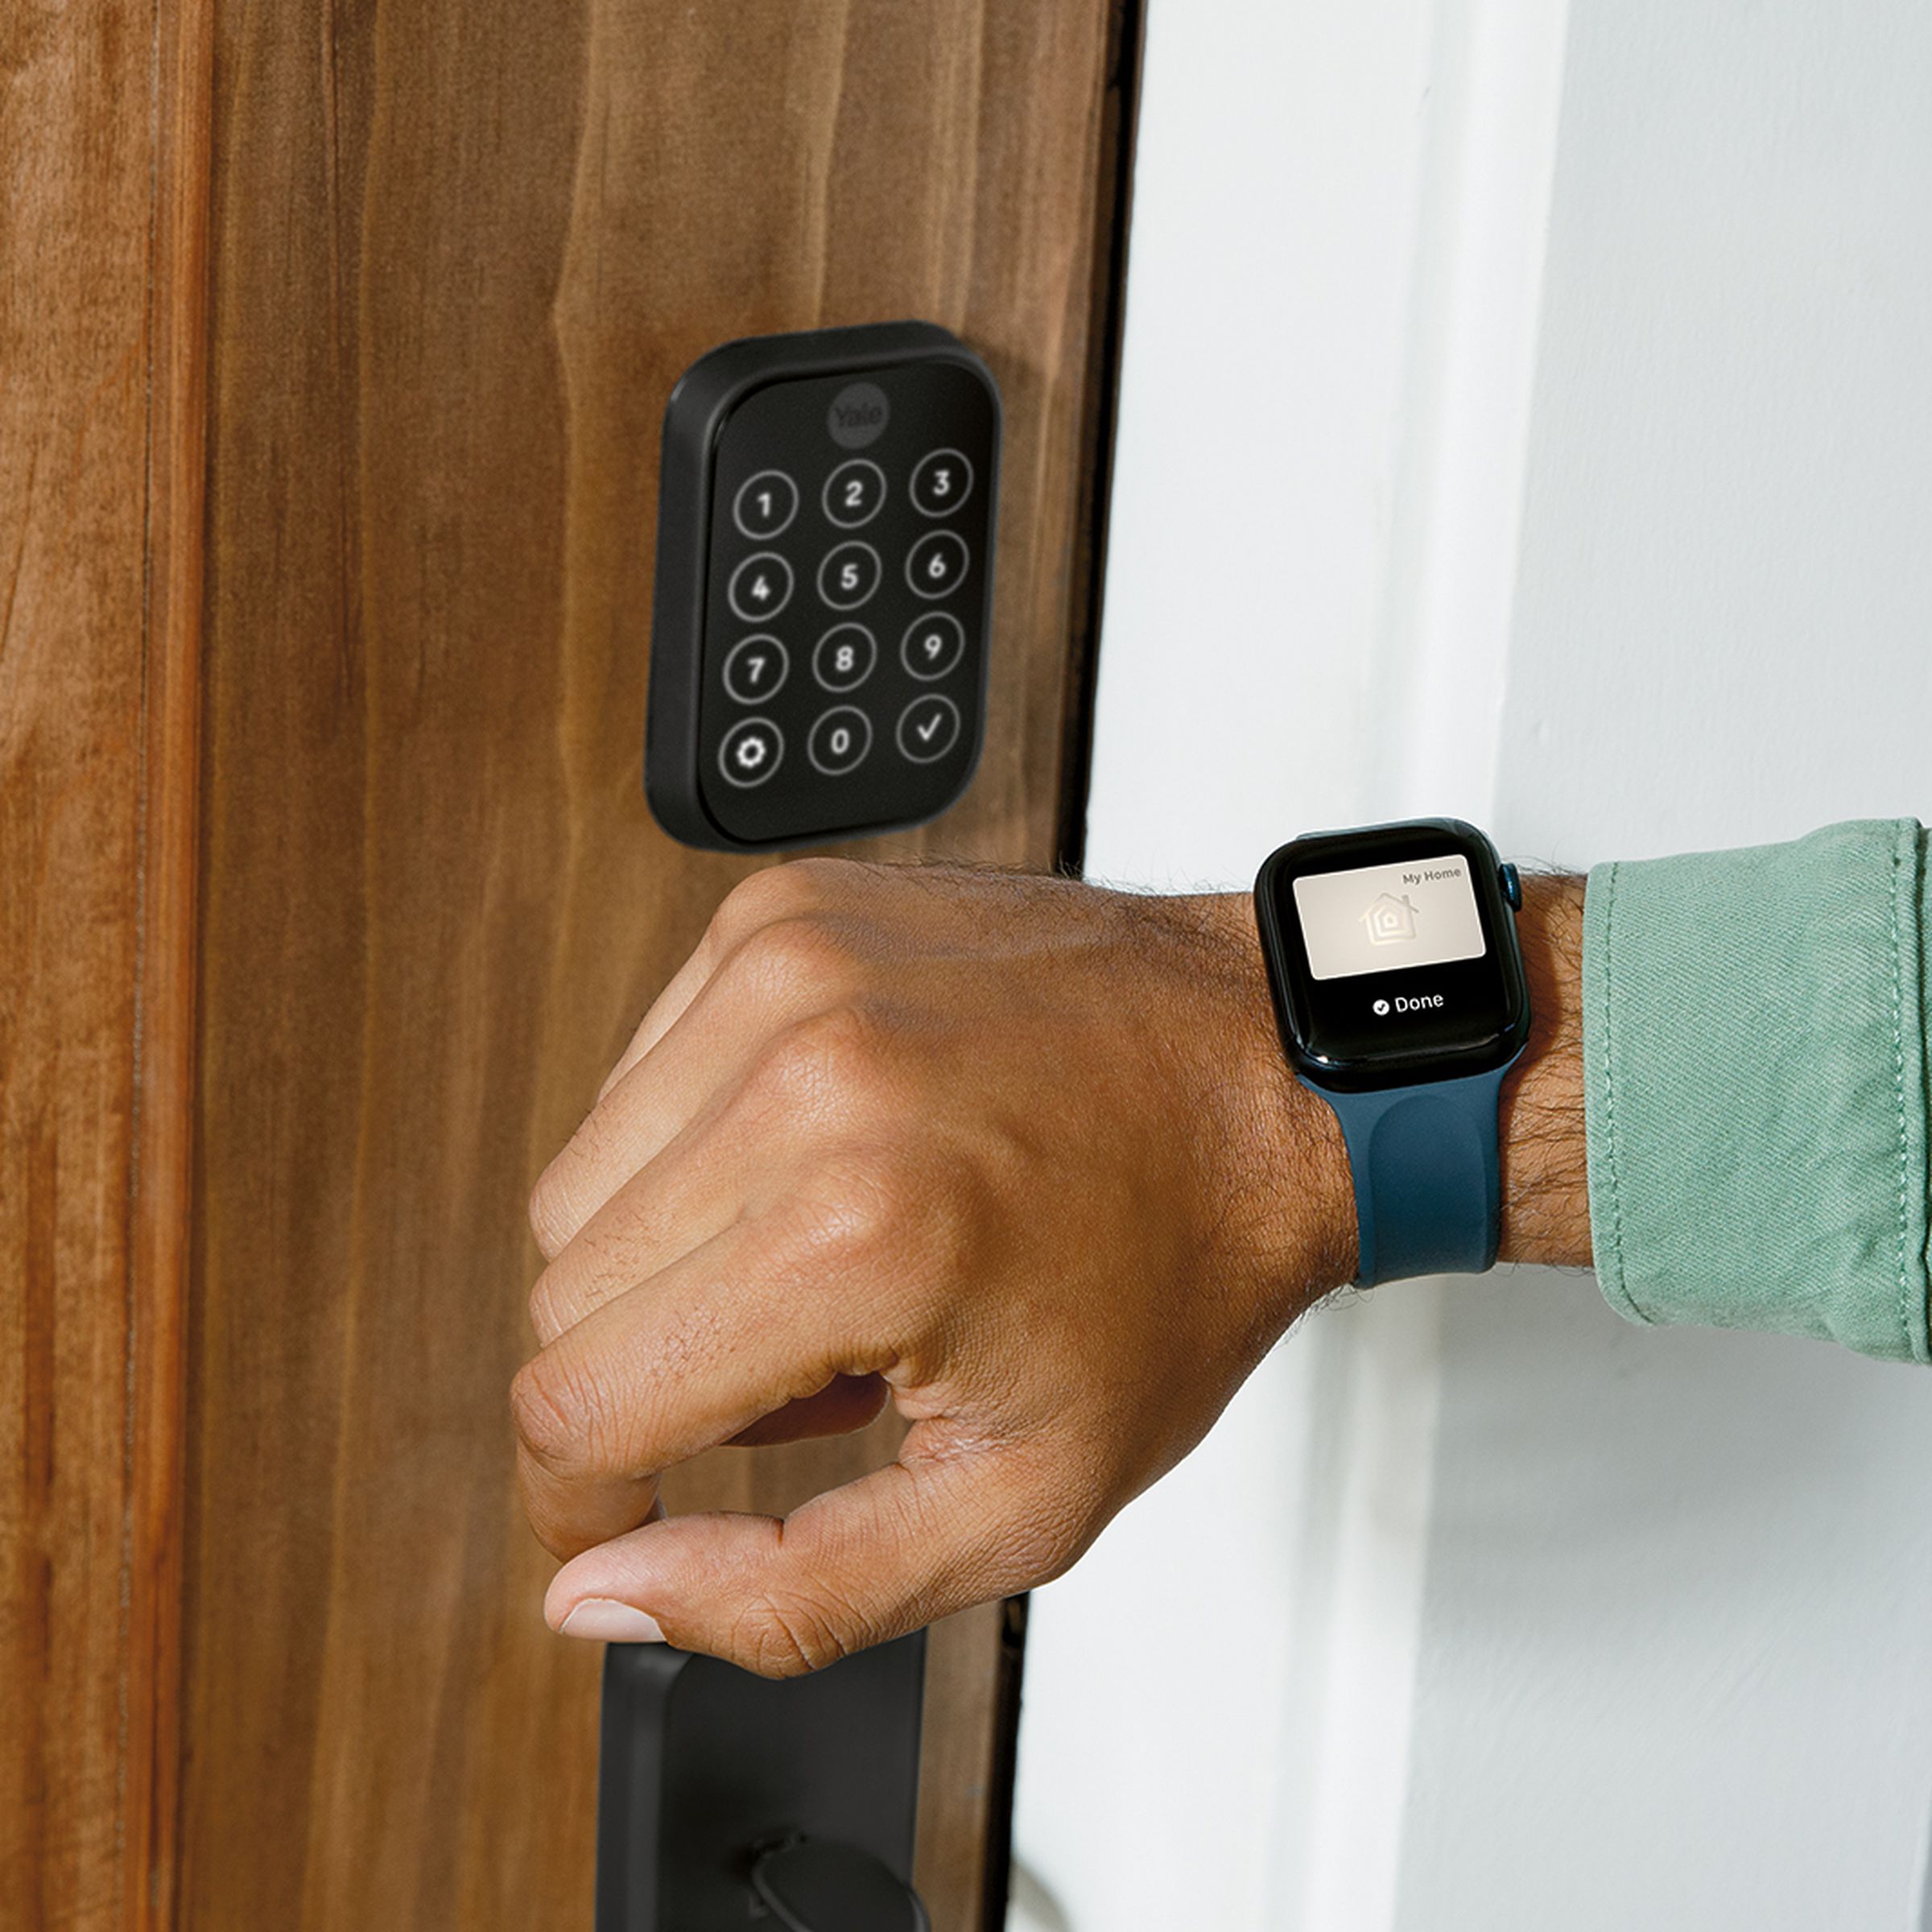 The Yale Assure Lock 2 Plus works with HomeKey, so you can open it with your wrist instead of your hand if you have an Apple Watch. 